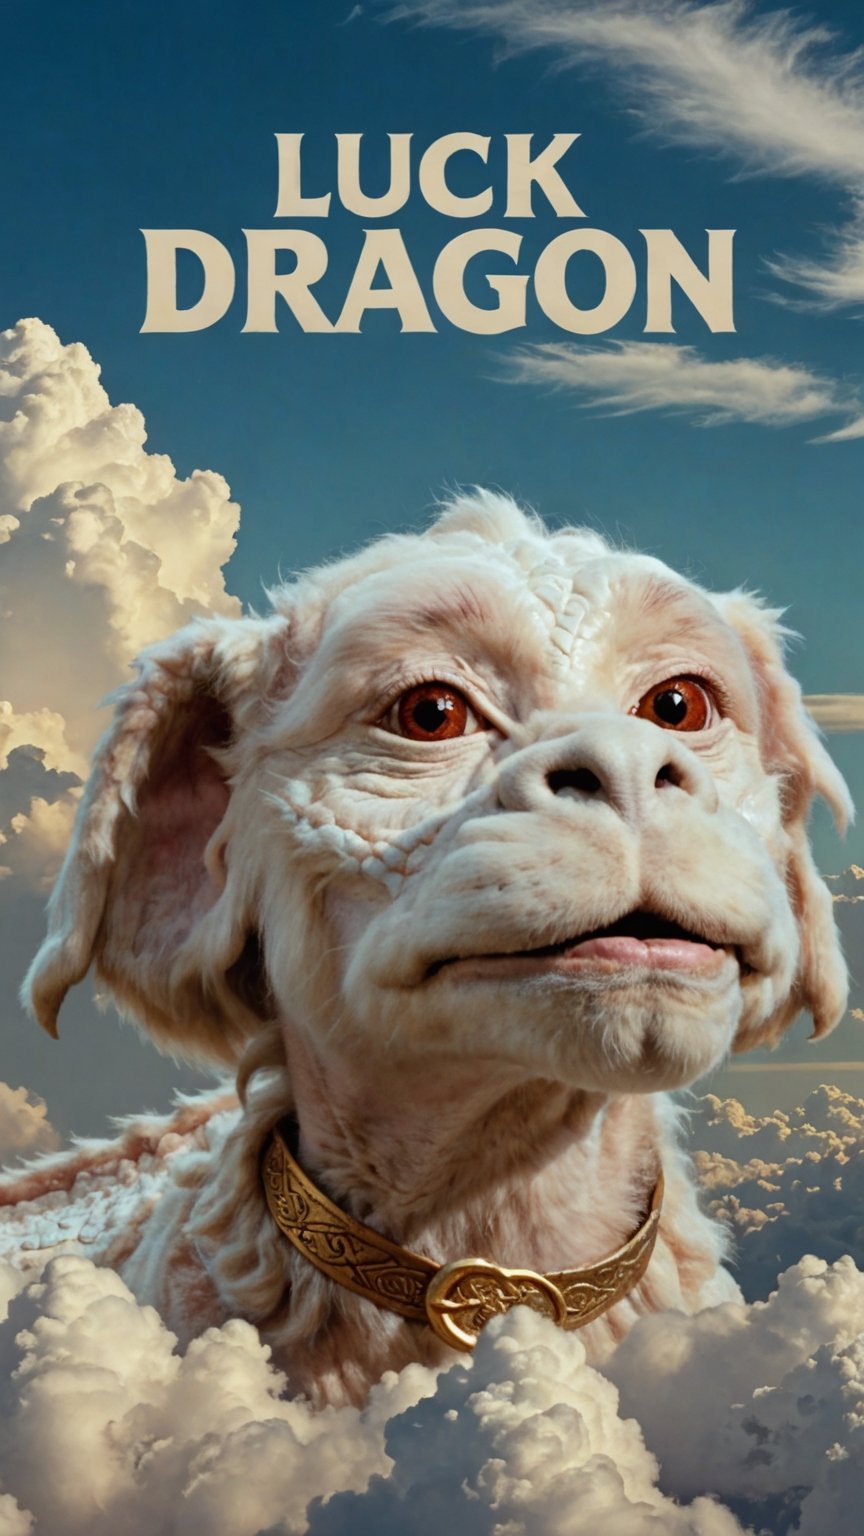 Photo of falkor in clouds with text that says "luck dragon" 